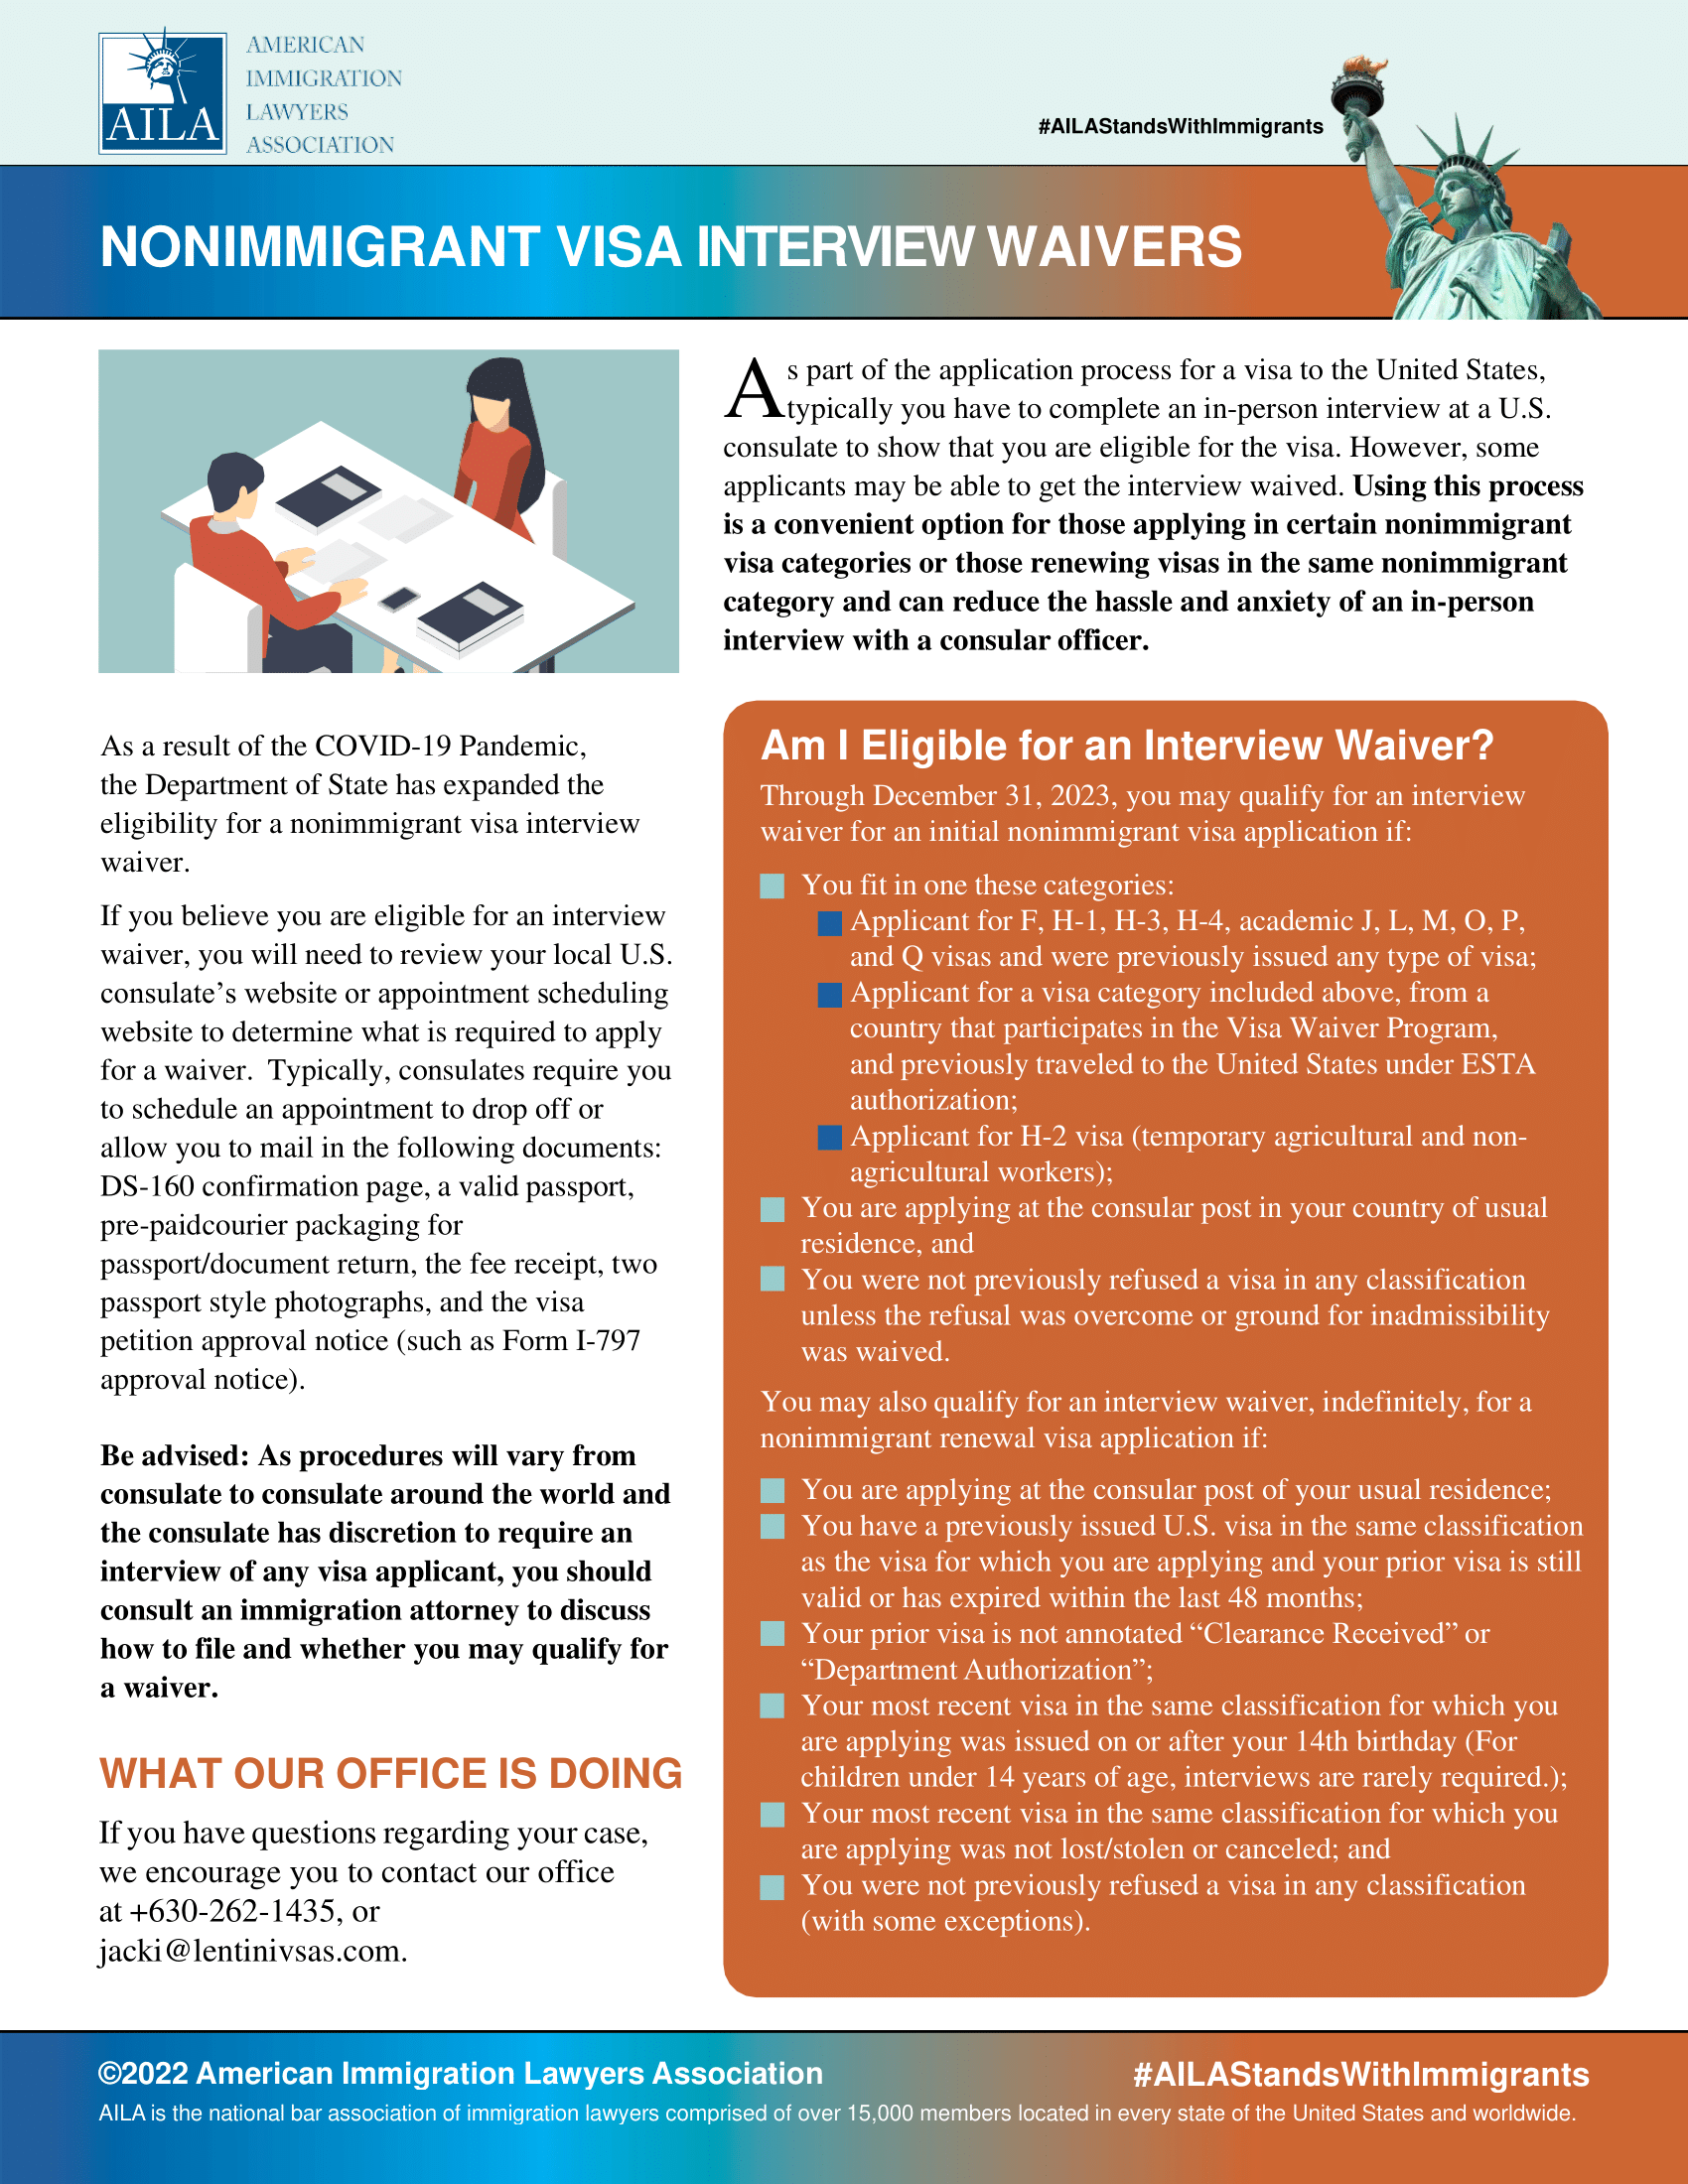 AILA flyer on Nonimmigrant Visa Interview Waivers